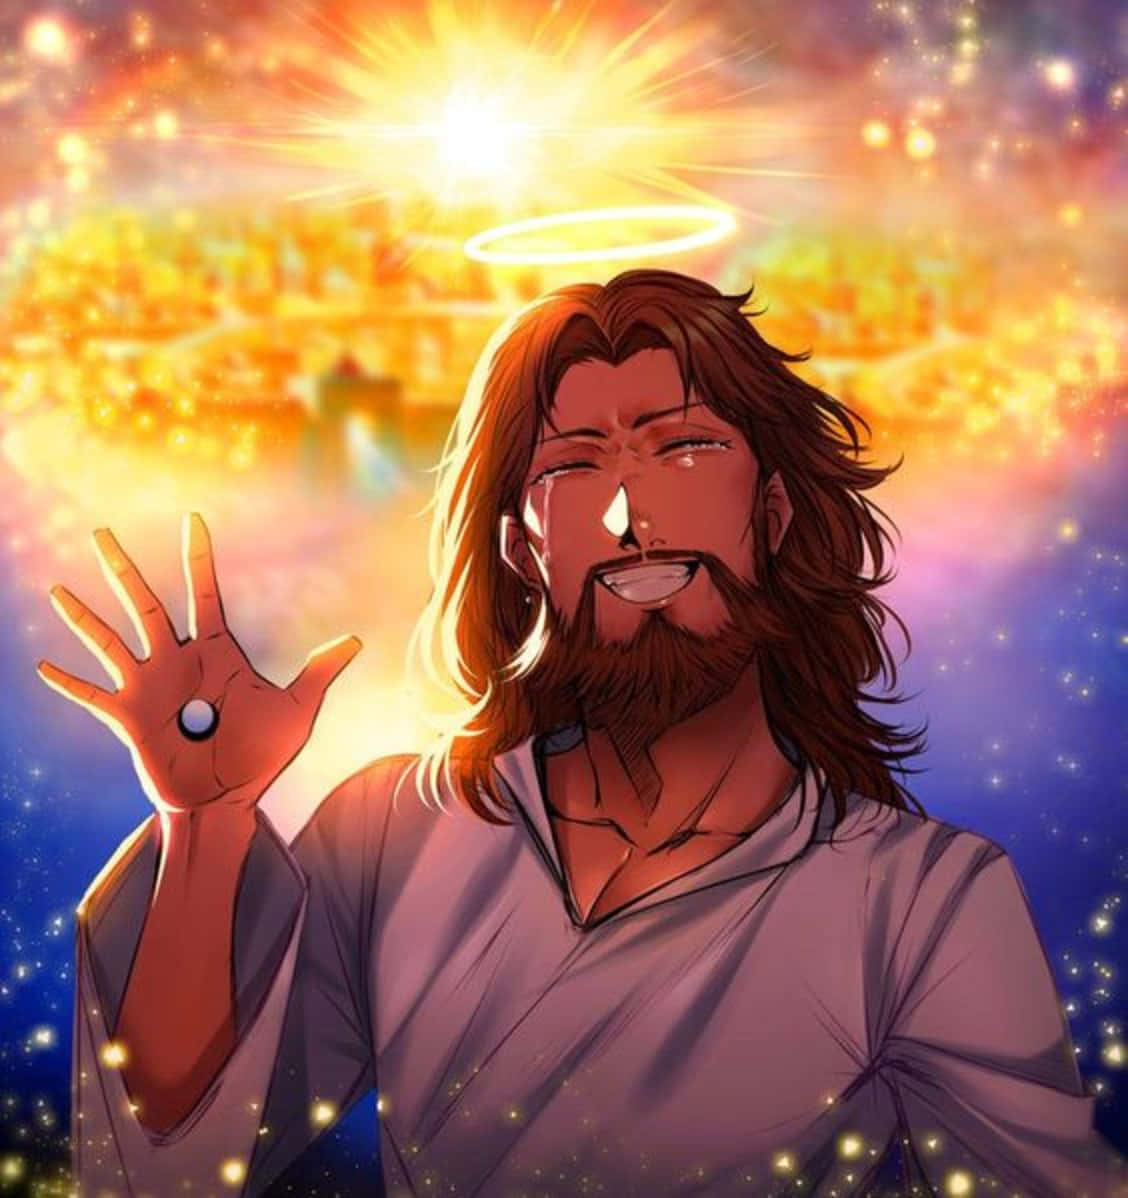 Make A Bold Statement With This Stylish Image Of Cool Jesus. Background